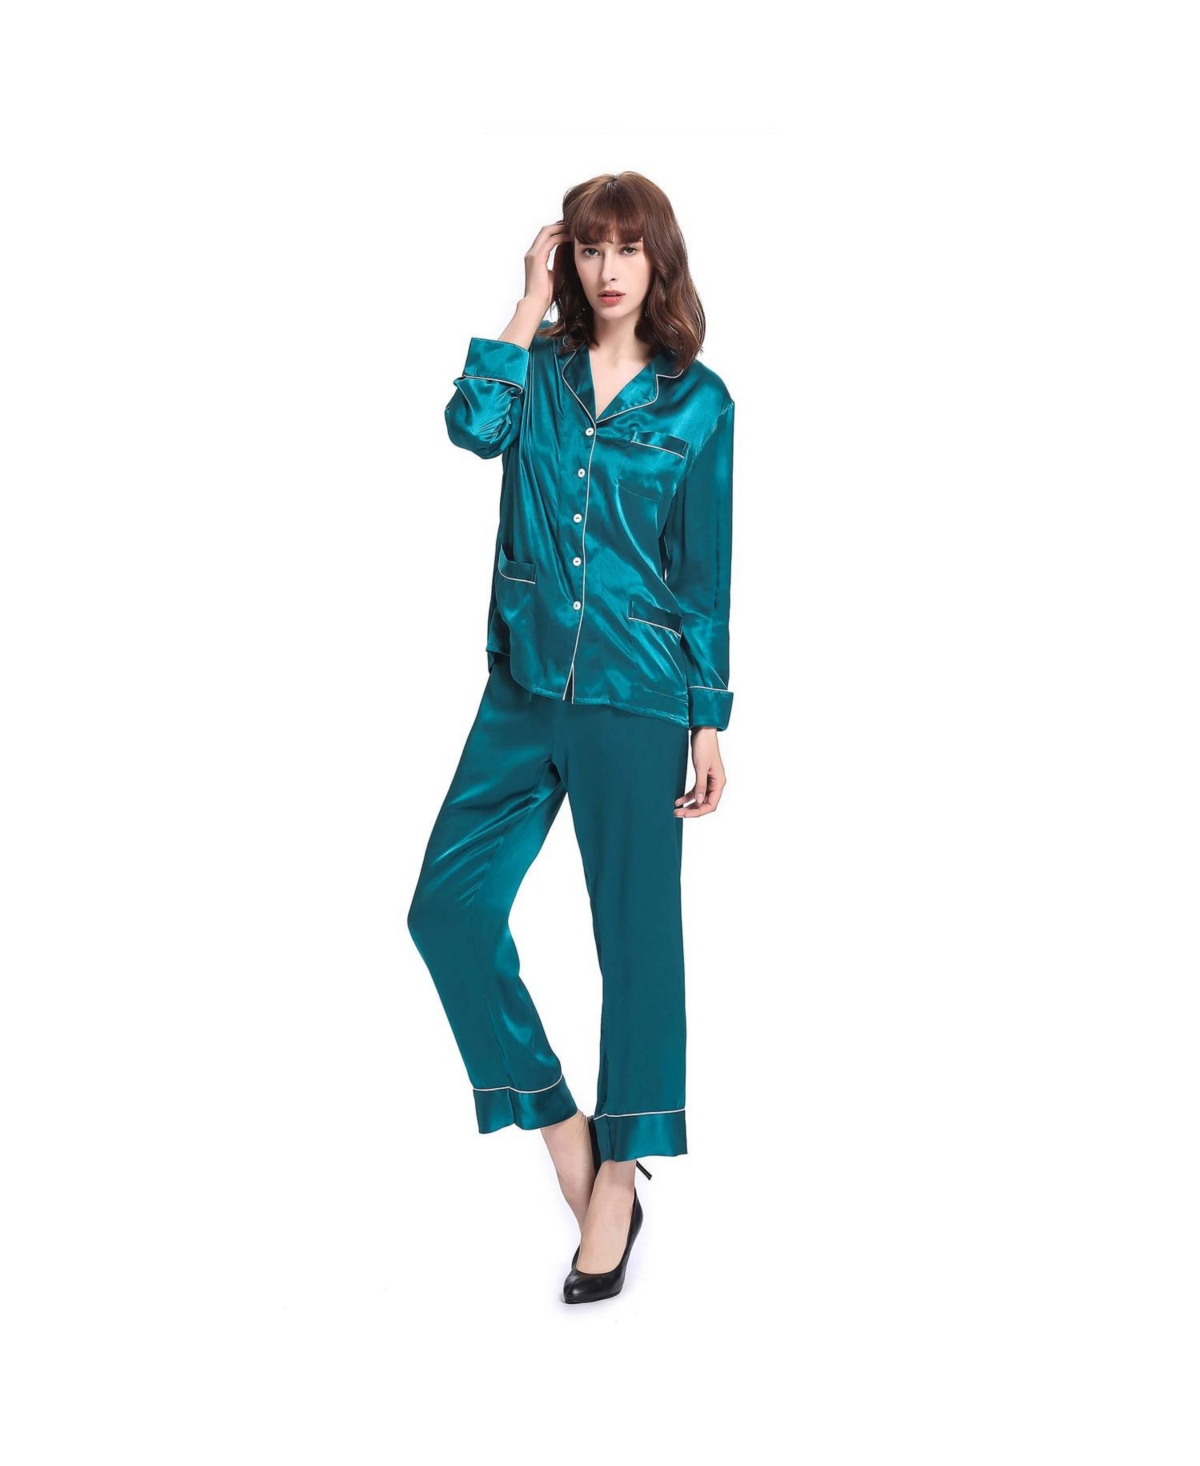 LILYSILK 22 MOMME CHIC TRIMMED SILK PAJAMA SET FOR WOMEN